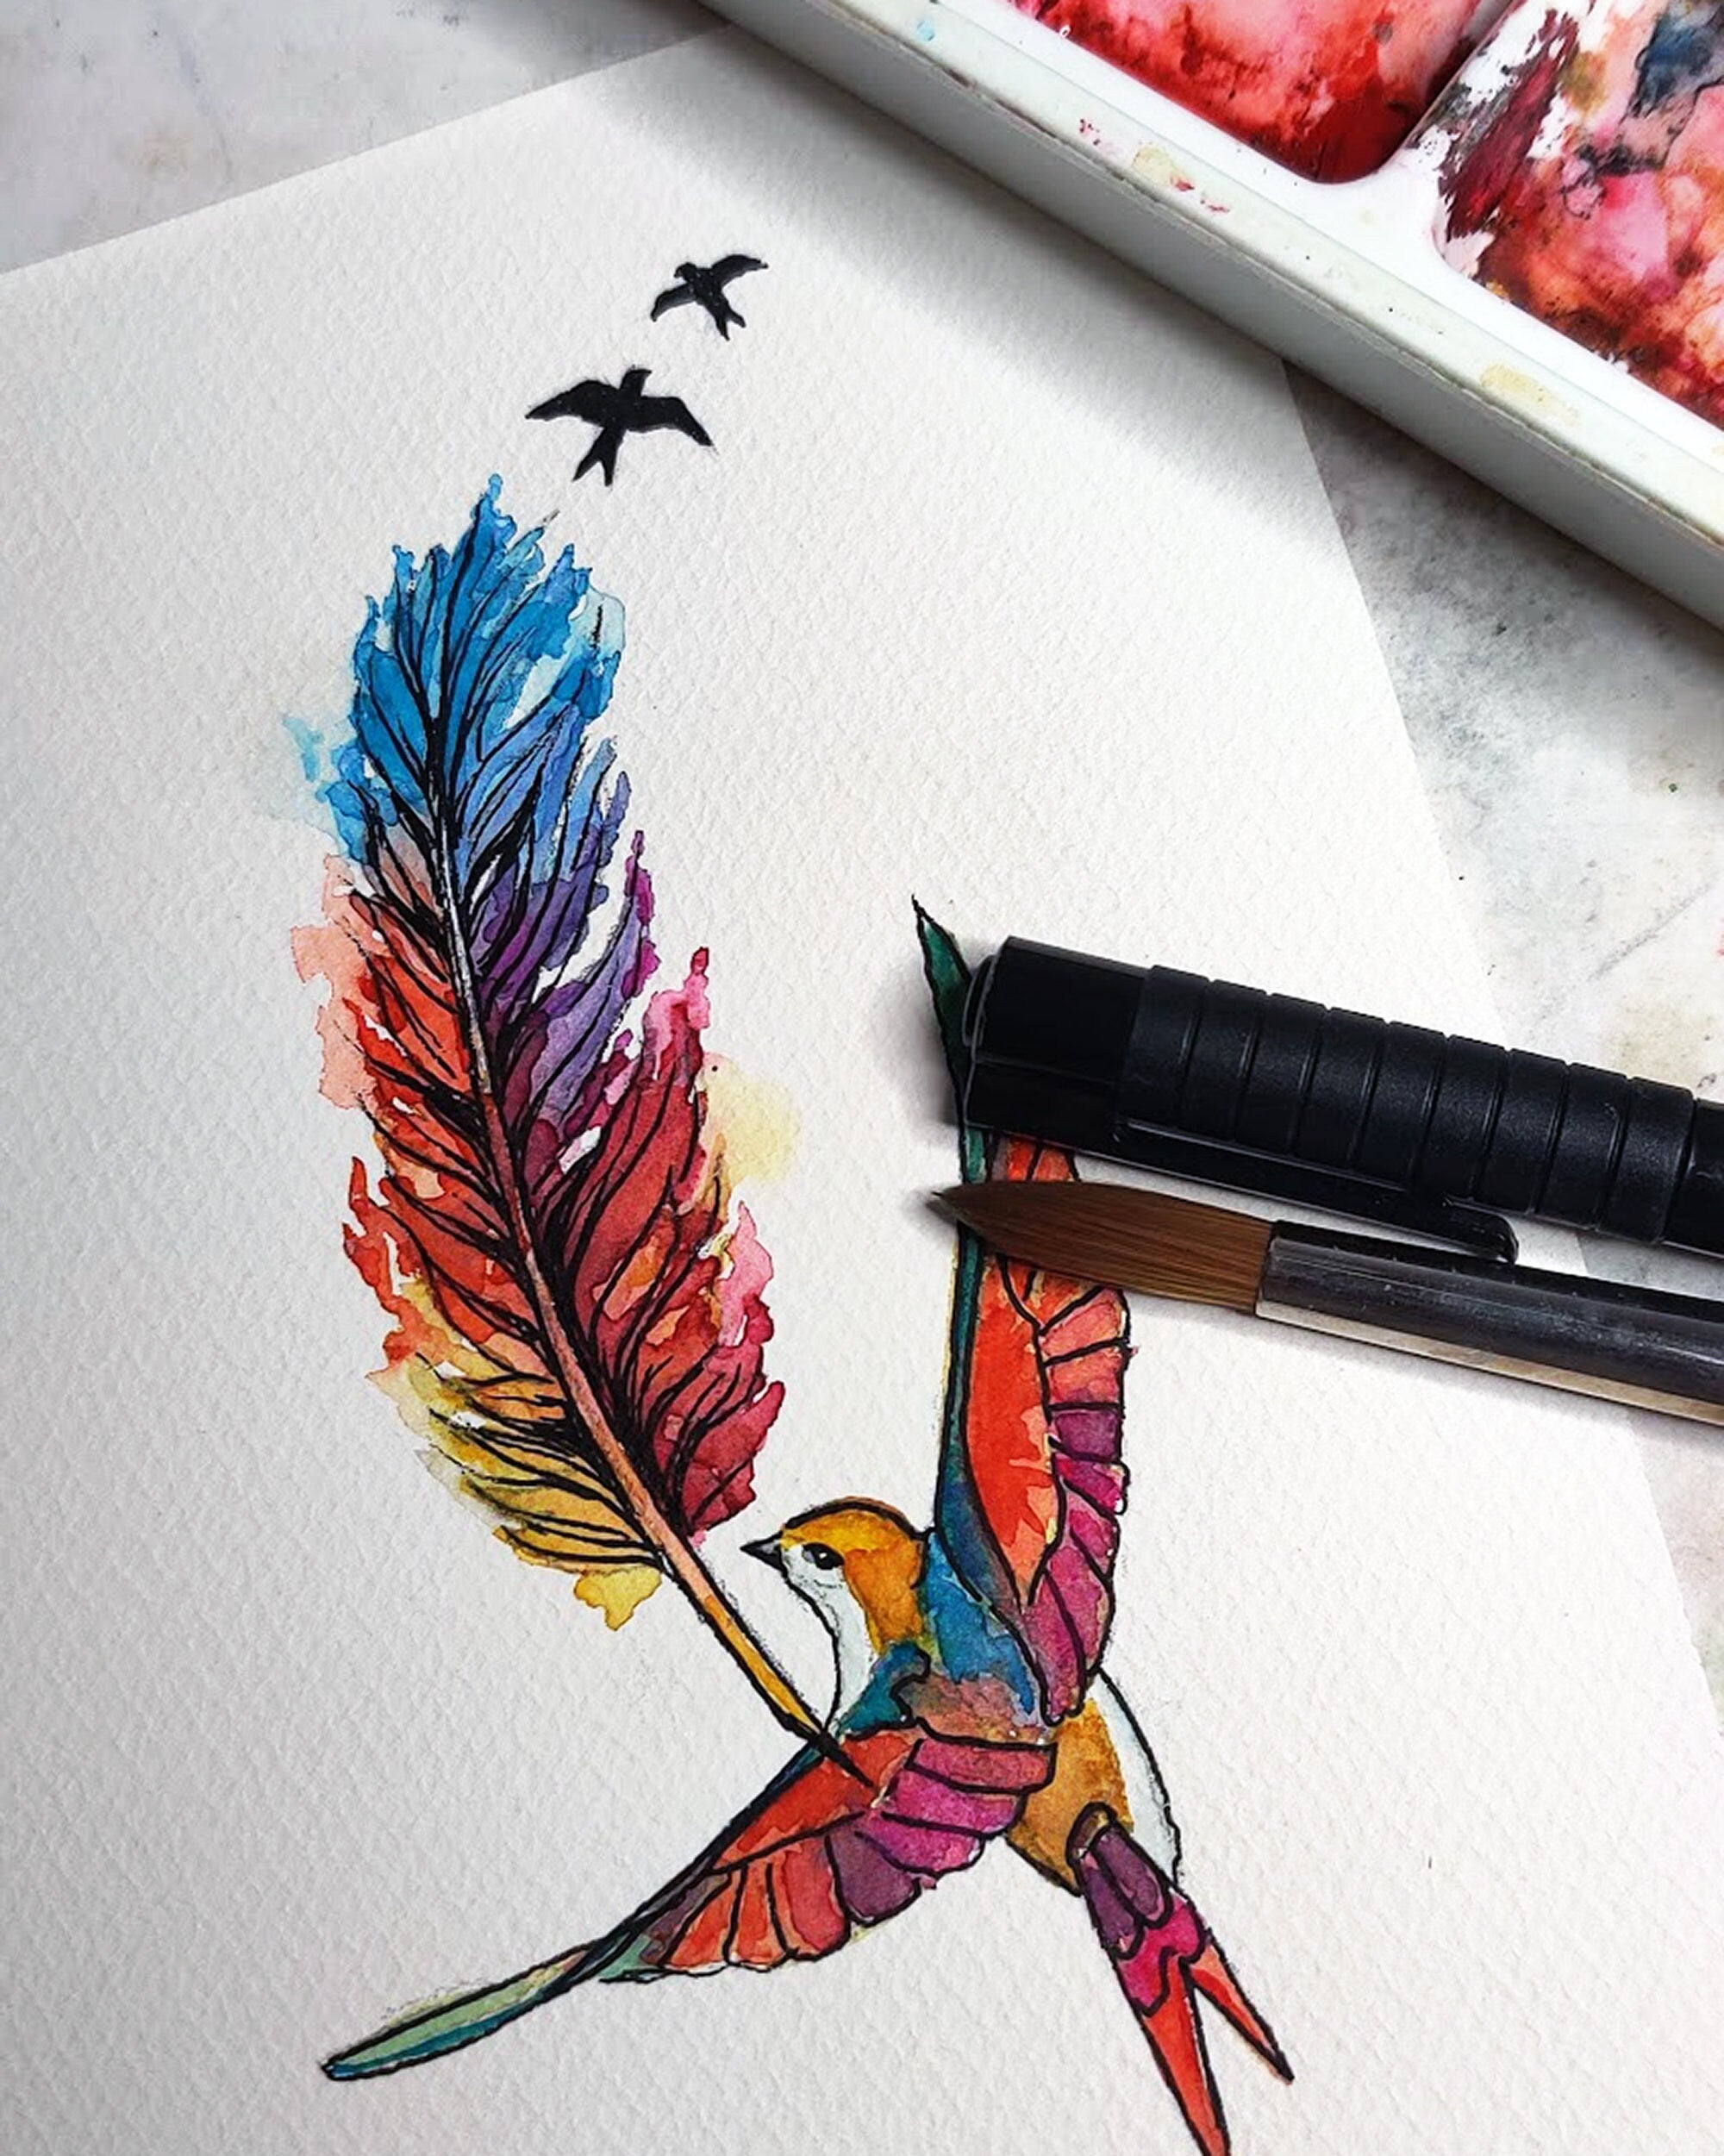 Colorful parrot with a flower, thank you Crisvel✌️ . . . #tattoo #tattoos  #tattooartist #bodyart #watercolor #watercolour #watercolor... | Instagram